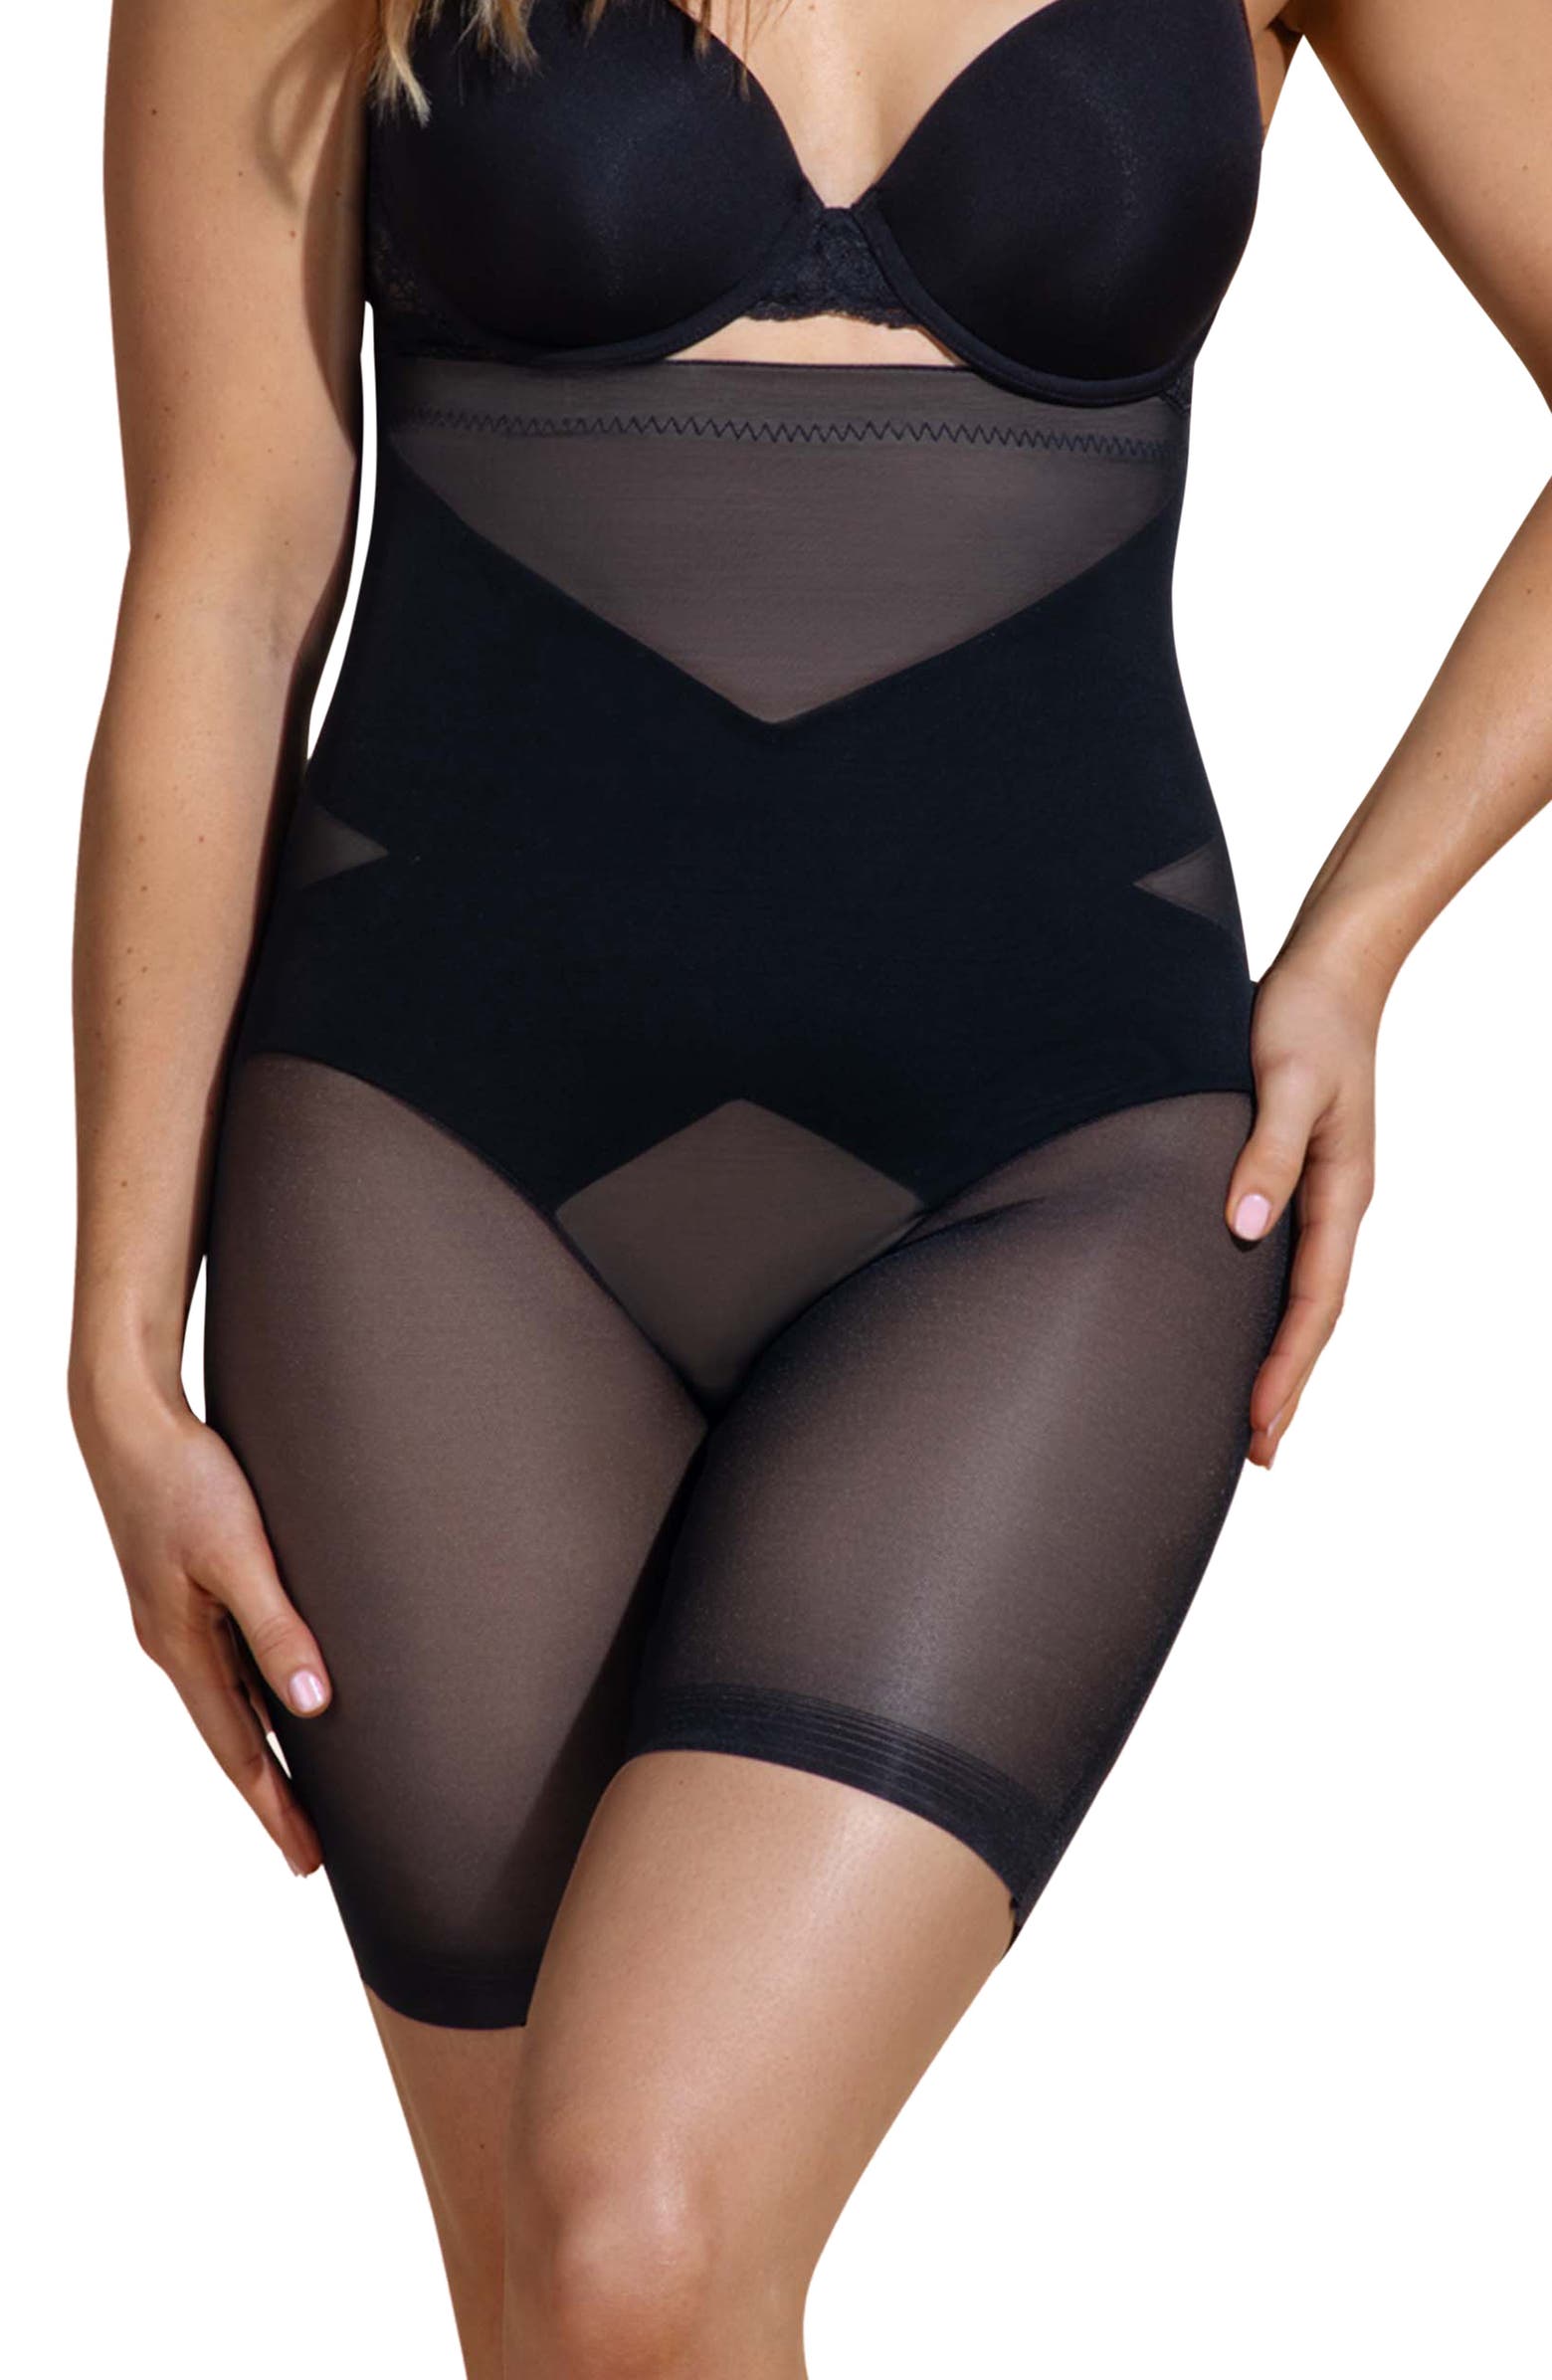 Video The best shapewear for your personal comfort and style - ABC